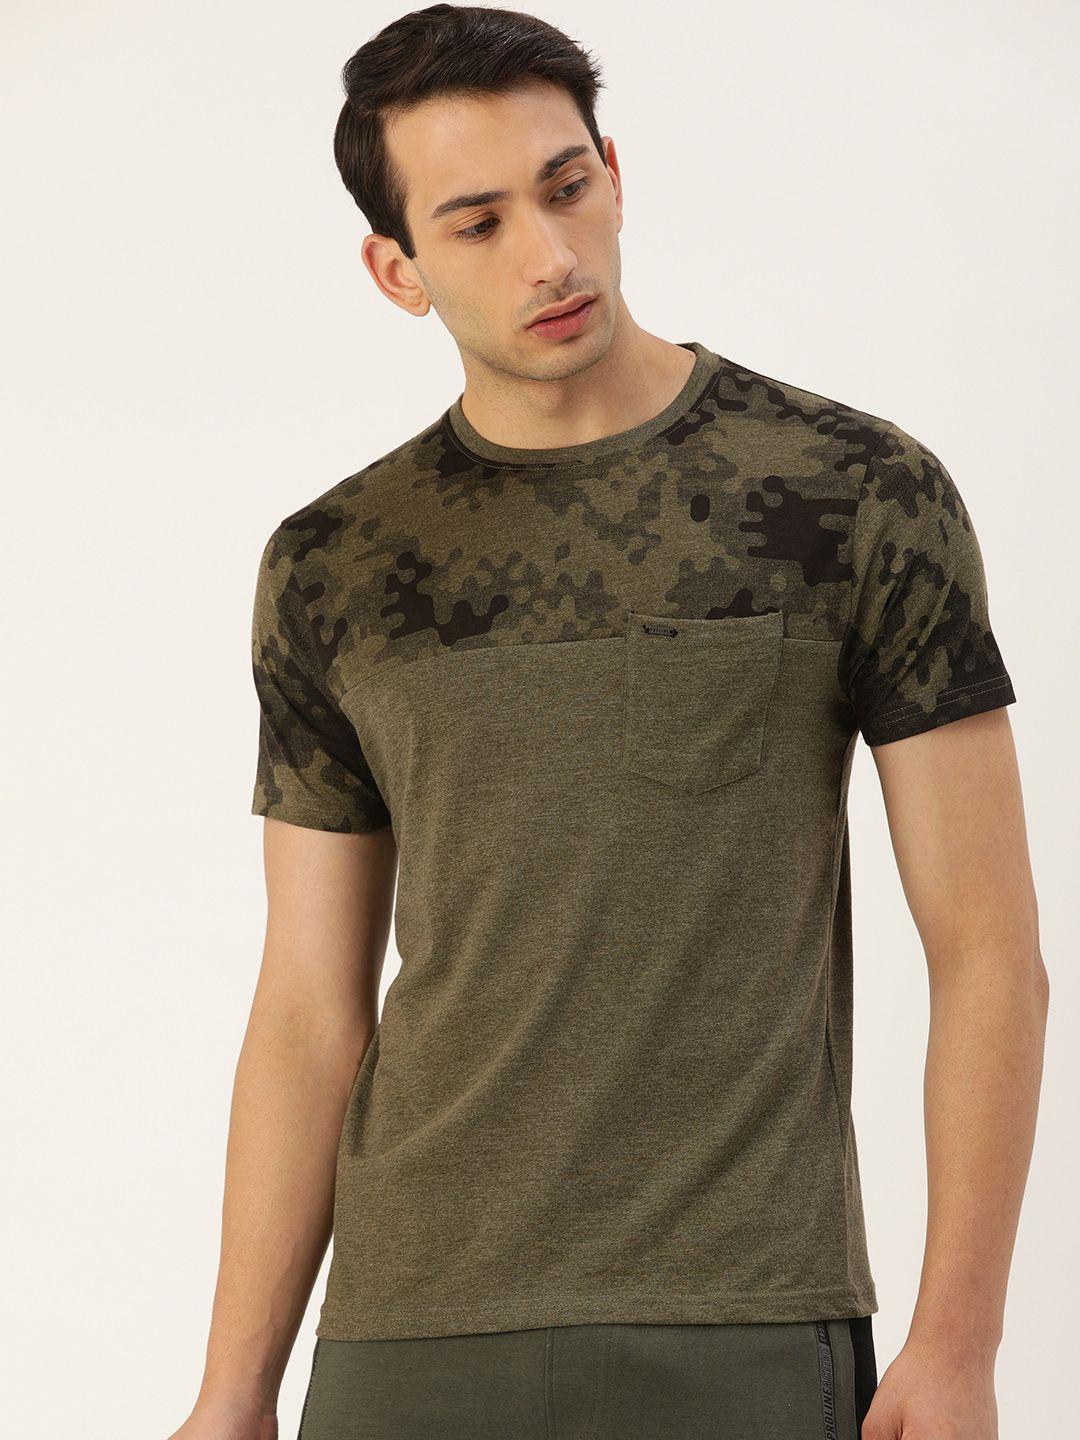 proline active men olive green & black camouflage placement printed round neck t-shirt